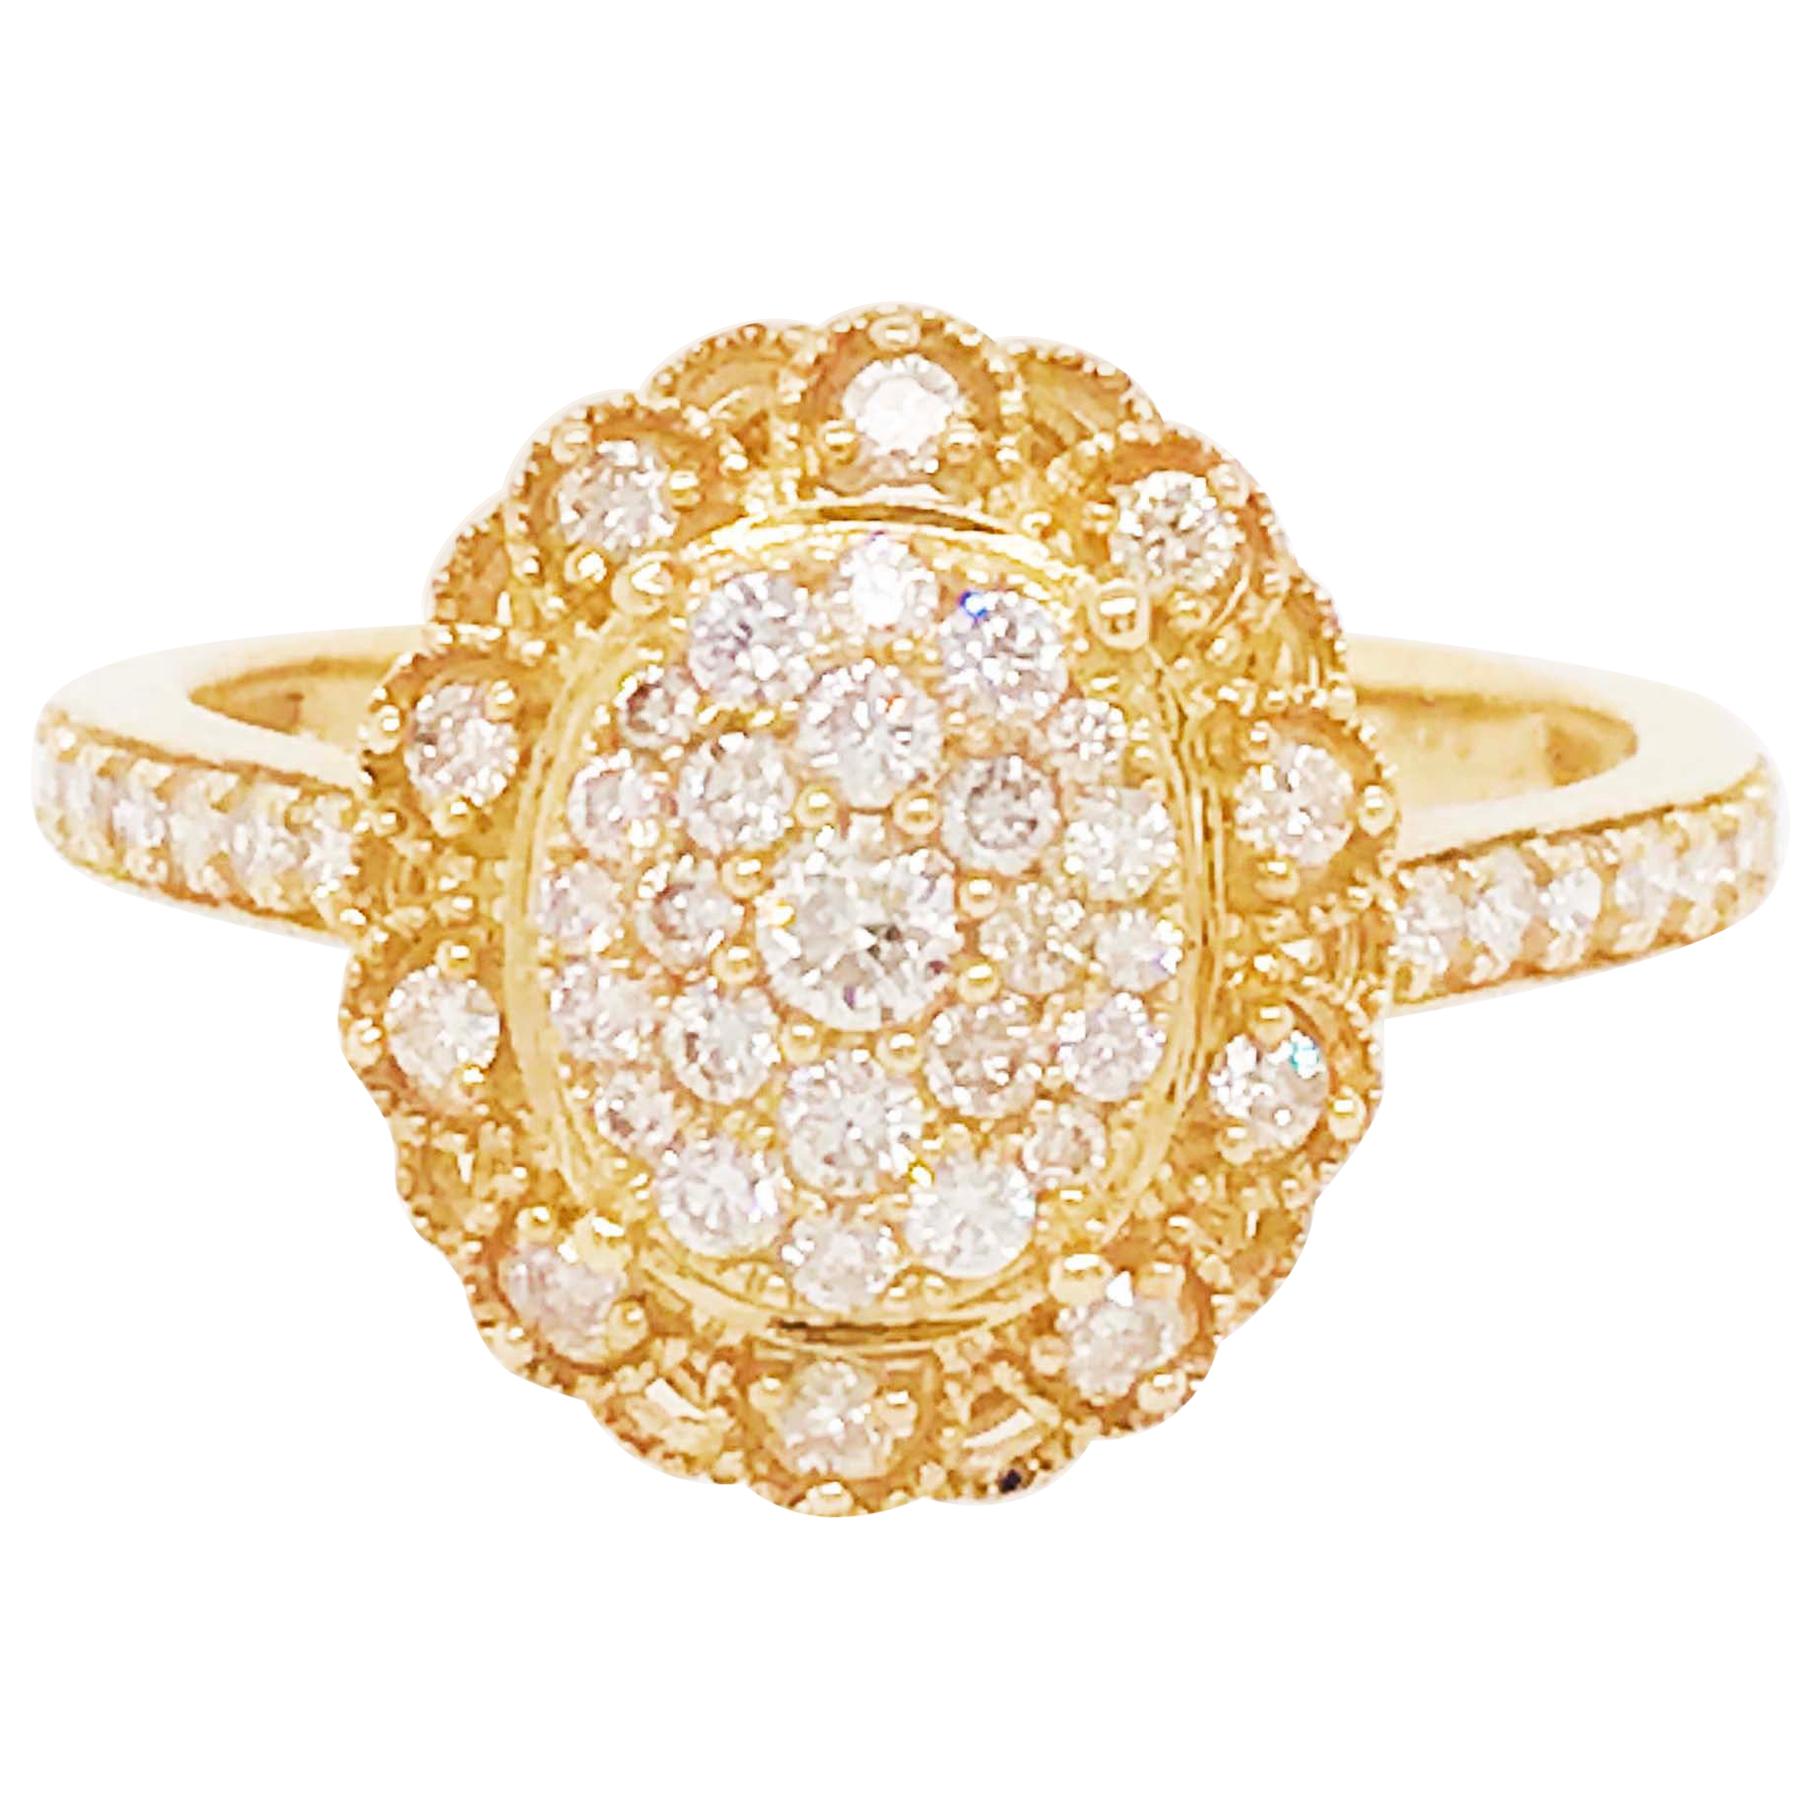 Antique Inspired Oval Pave 1/2 Carat Diamond Engagement Ring in Yellow Gold